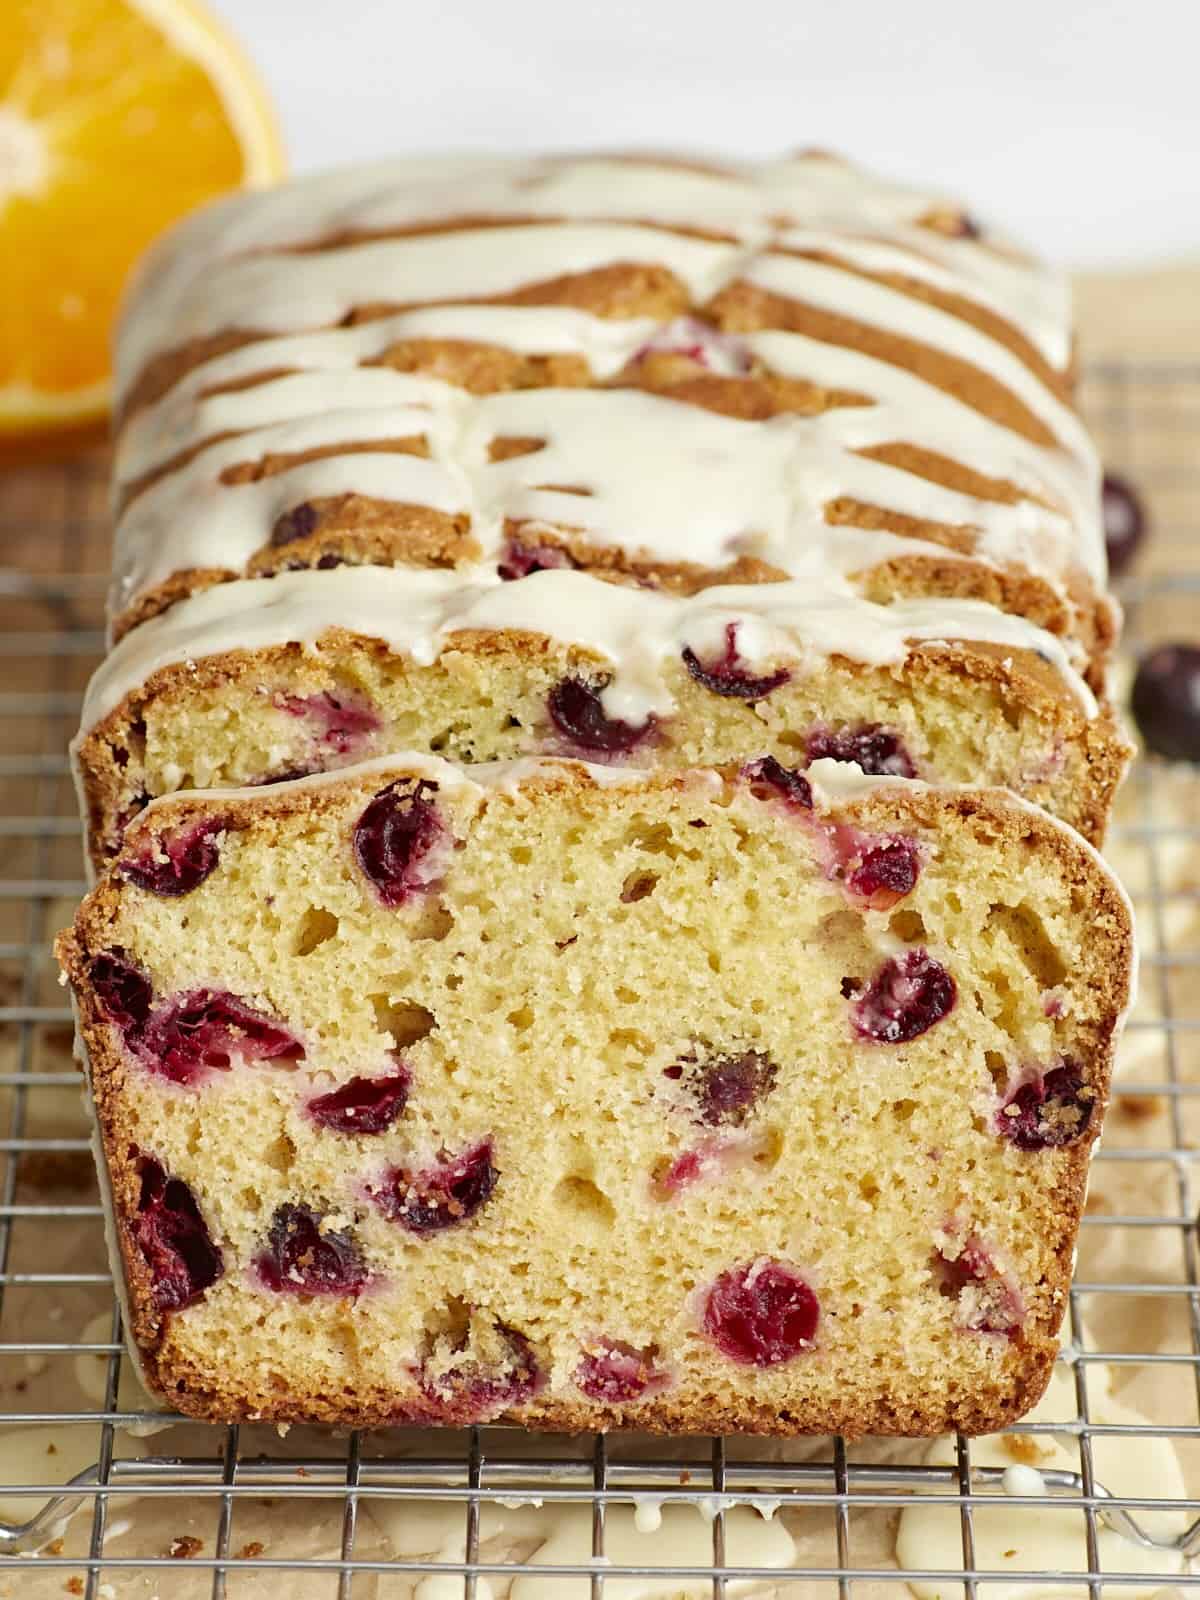 Front view of a sliced loaf of cranberry orange bread.